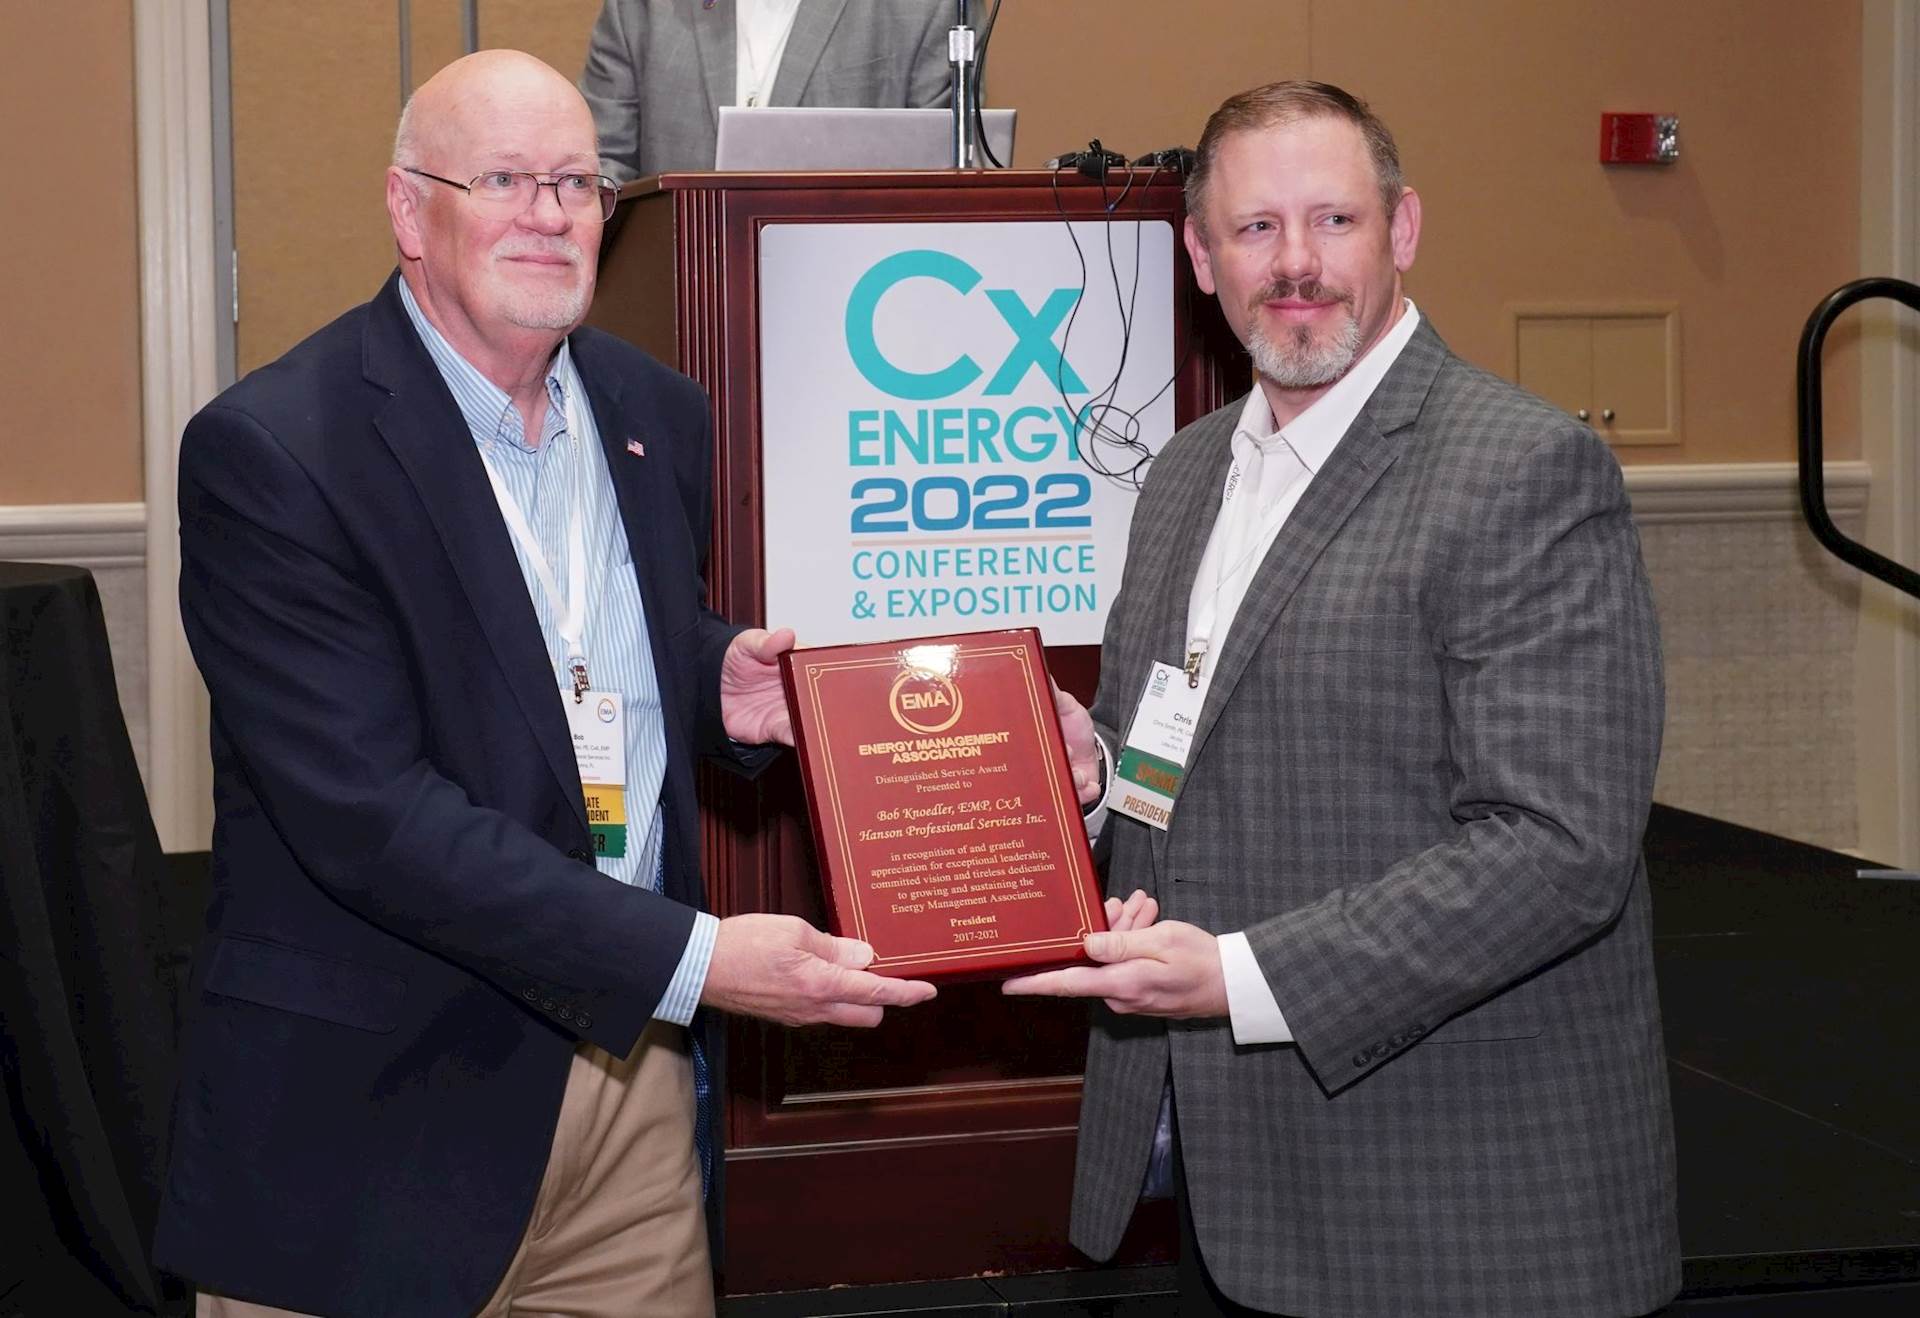 : Bob Knoedler accepting a plaque in front of a lectern with a CxEnergy sign